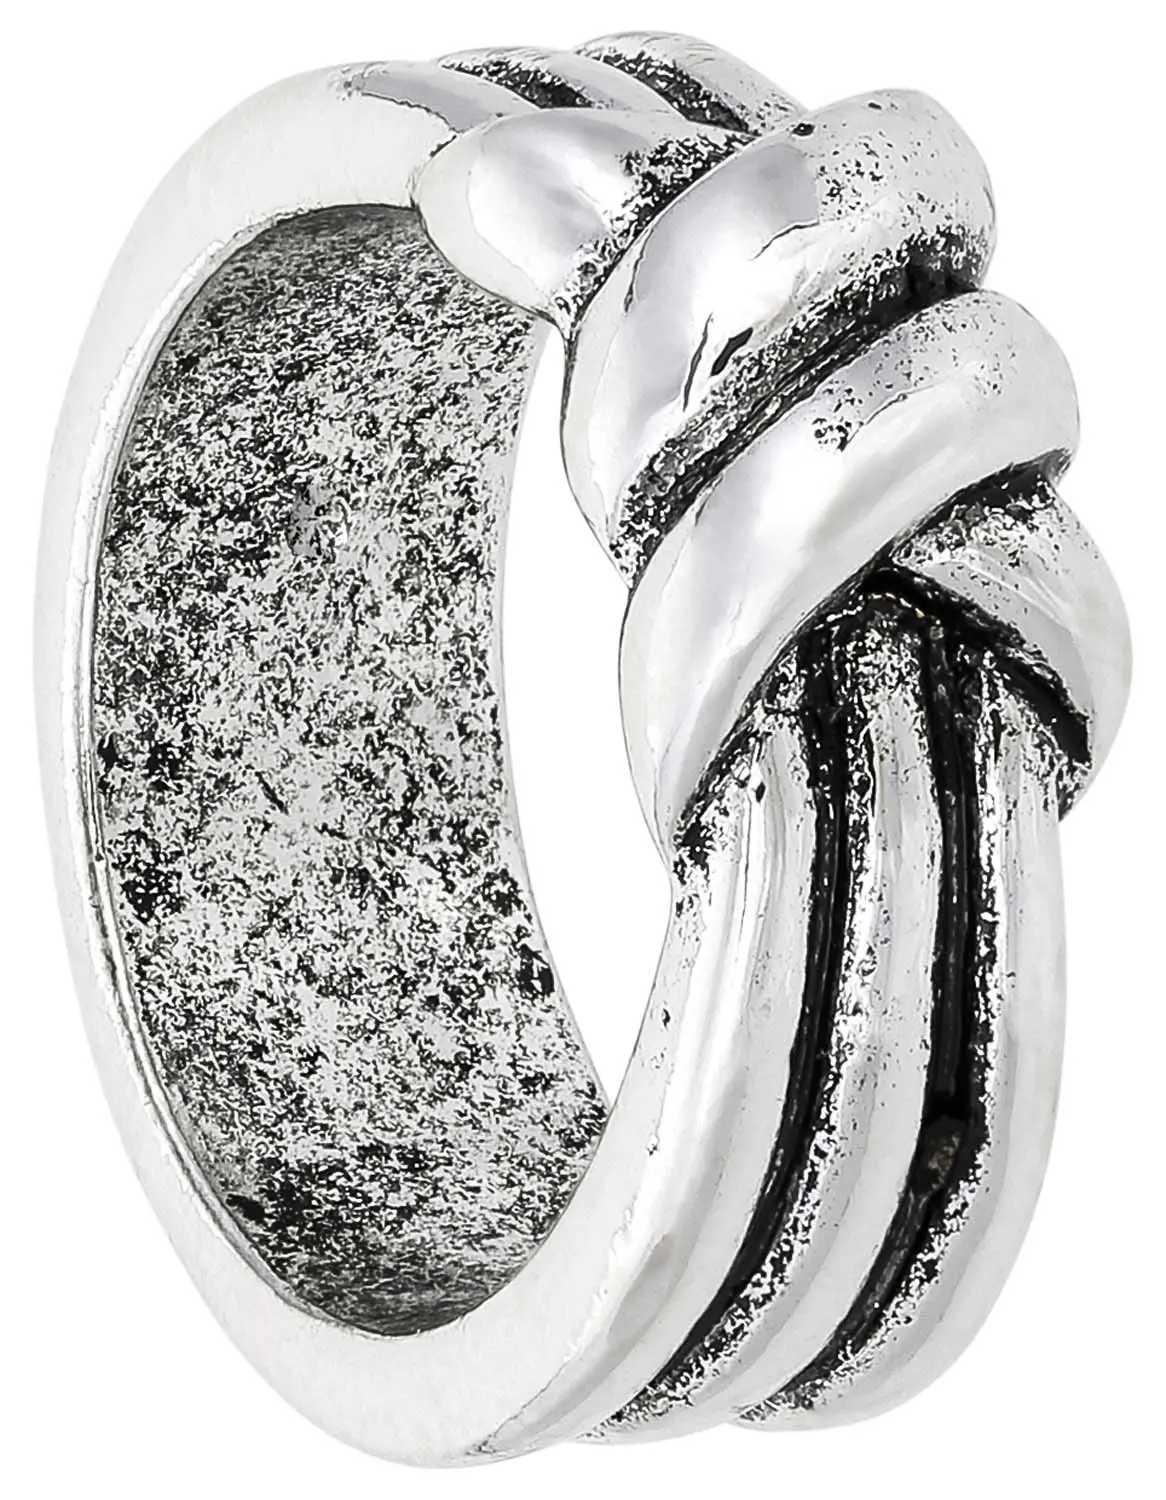 Ring - Knotted Silver